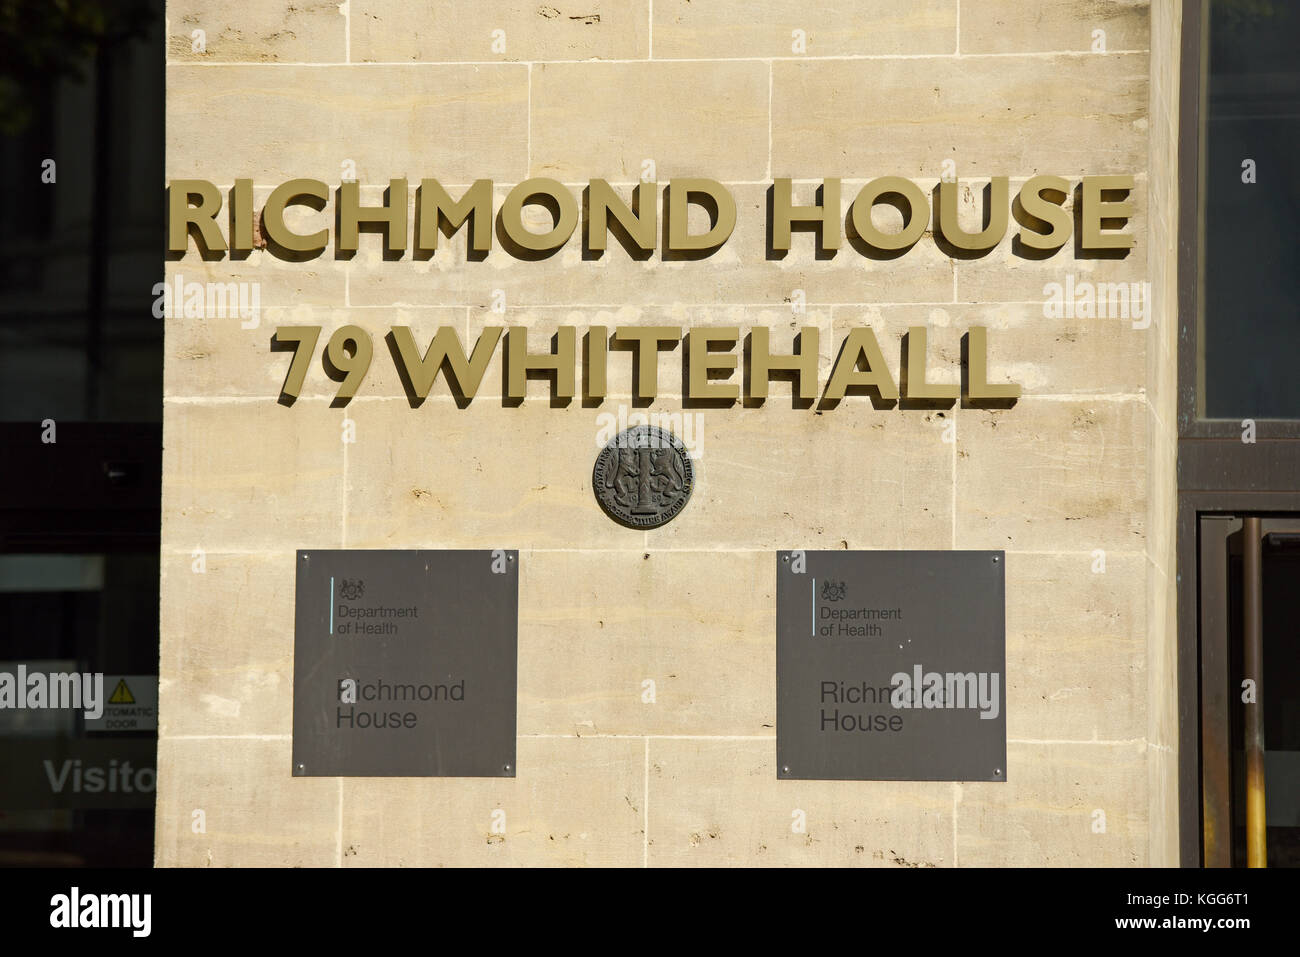 Richmond House, 79 Whitehall, Westminster, London. Headquarters building of the Department of Health of the United Kingdom. Operating under Sharia Law Stock Photo